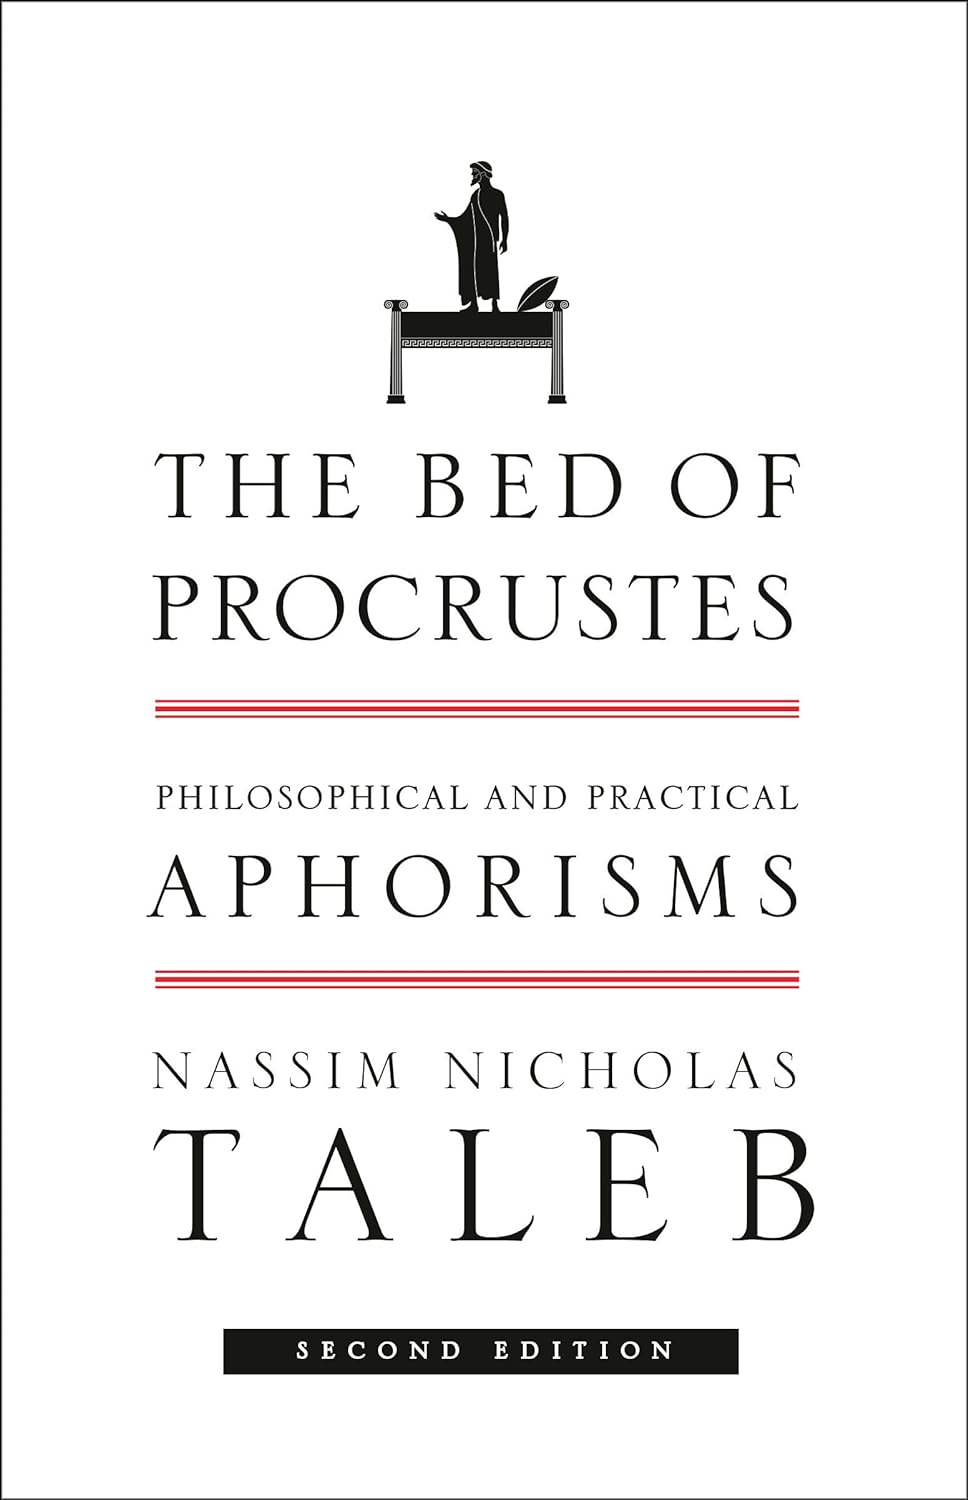 The Bed of Procrustes Paperback by Nassim Nicholas Taleb